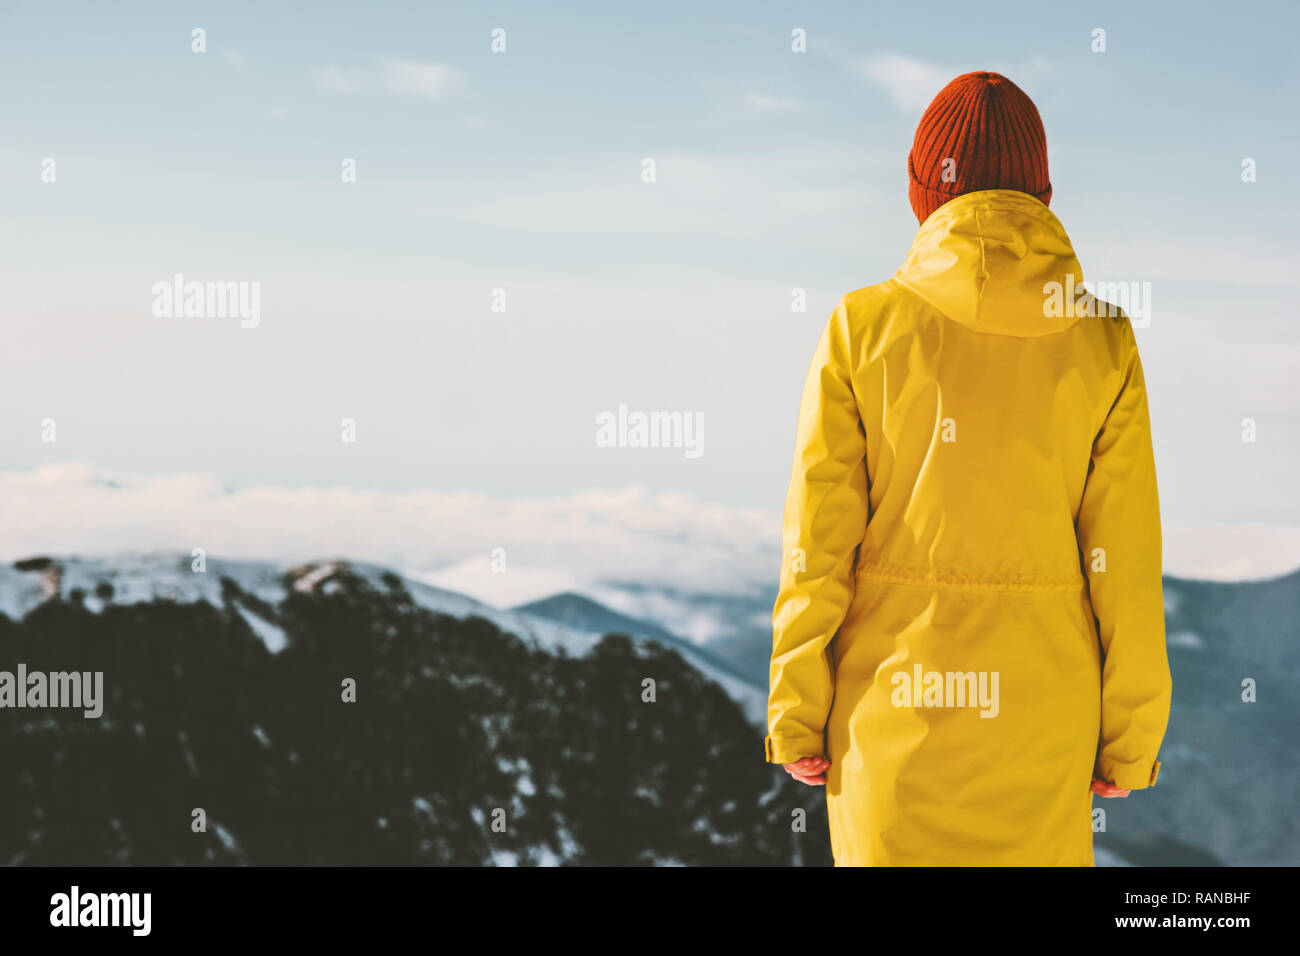 Woman exploring mountains adventure travel lifestyle winter vacations outdoor girl standing alone wearing yellow raincoat Stock Photo